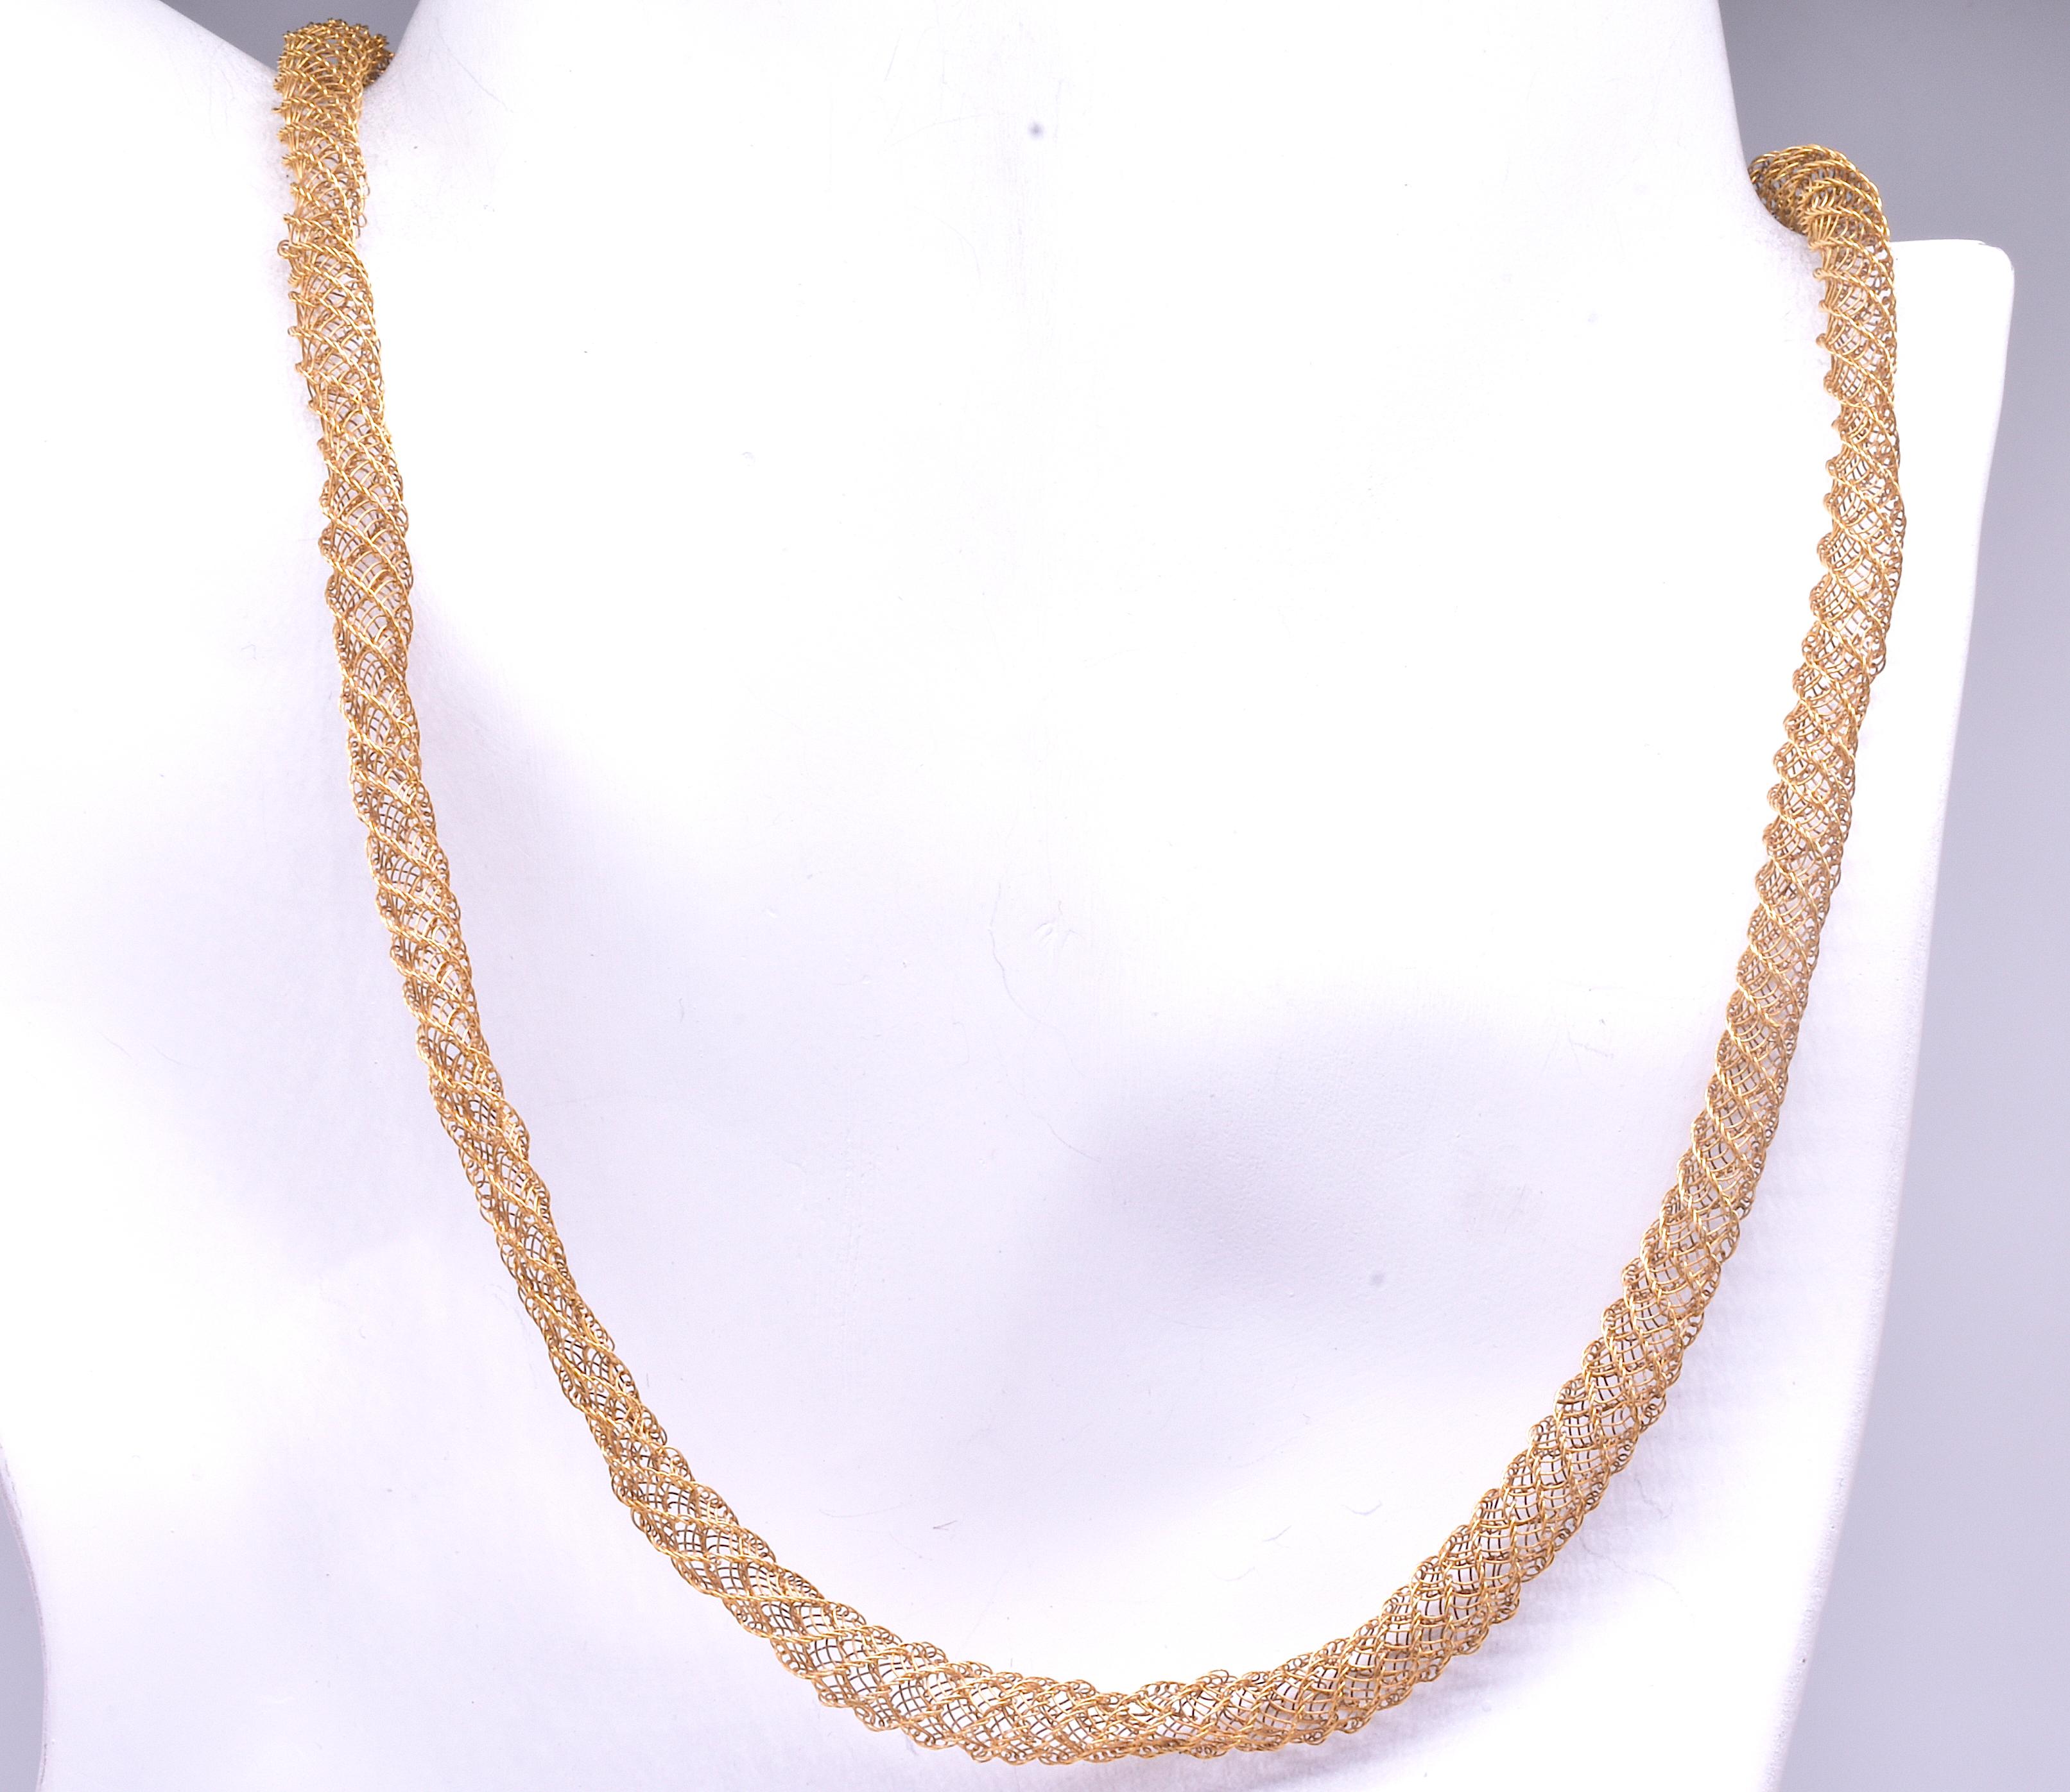 Delicate and ephemeral late Georgian necklace woven from gold to create a light transparent woven gold jewel.  Such necklaces often took the goldsmith weeks to make, and were entirely crafted by hand.

The necklace is lightweight around the neck and